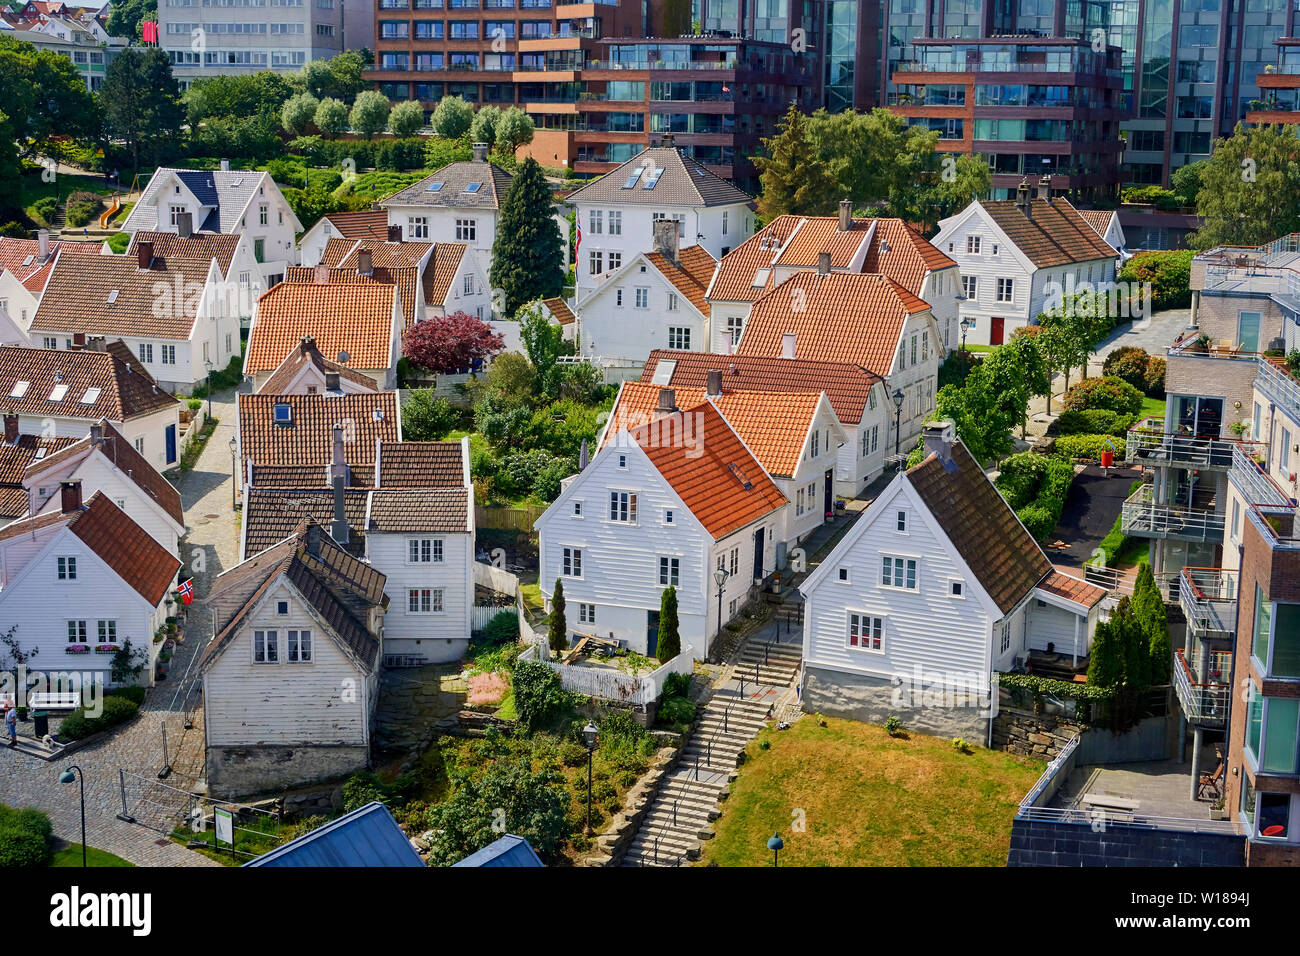 The village around the port of Stavanger taken off a cruise ship docked in the port. Norway, Europe.. Stock Photo